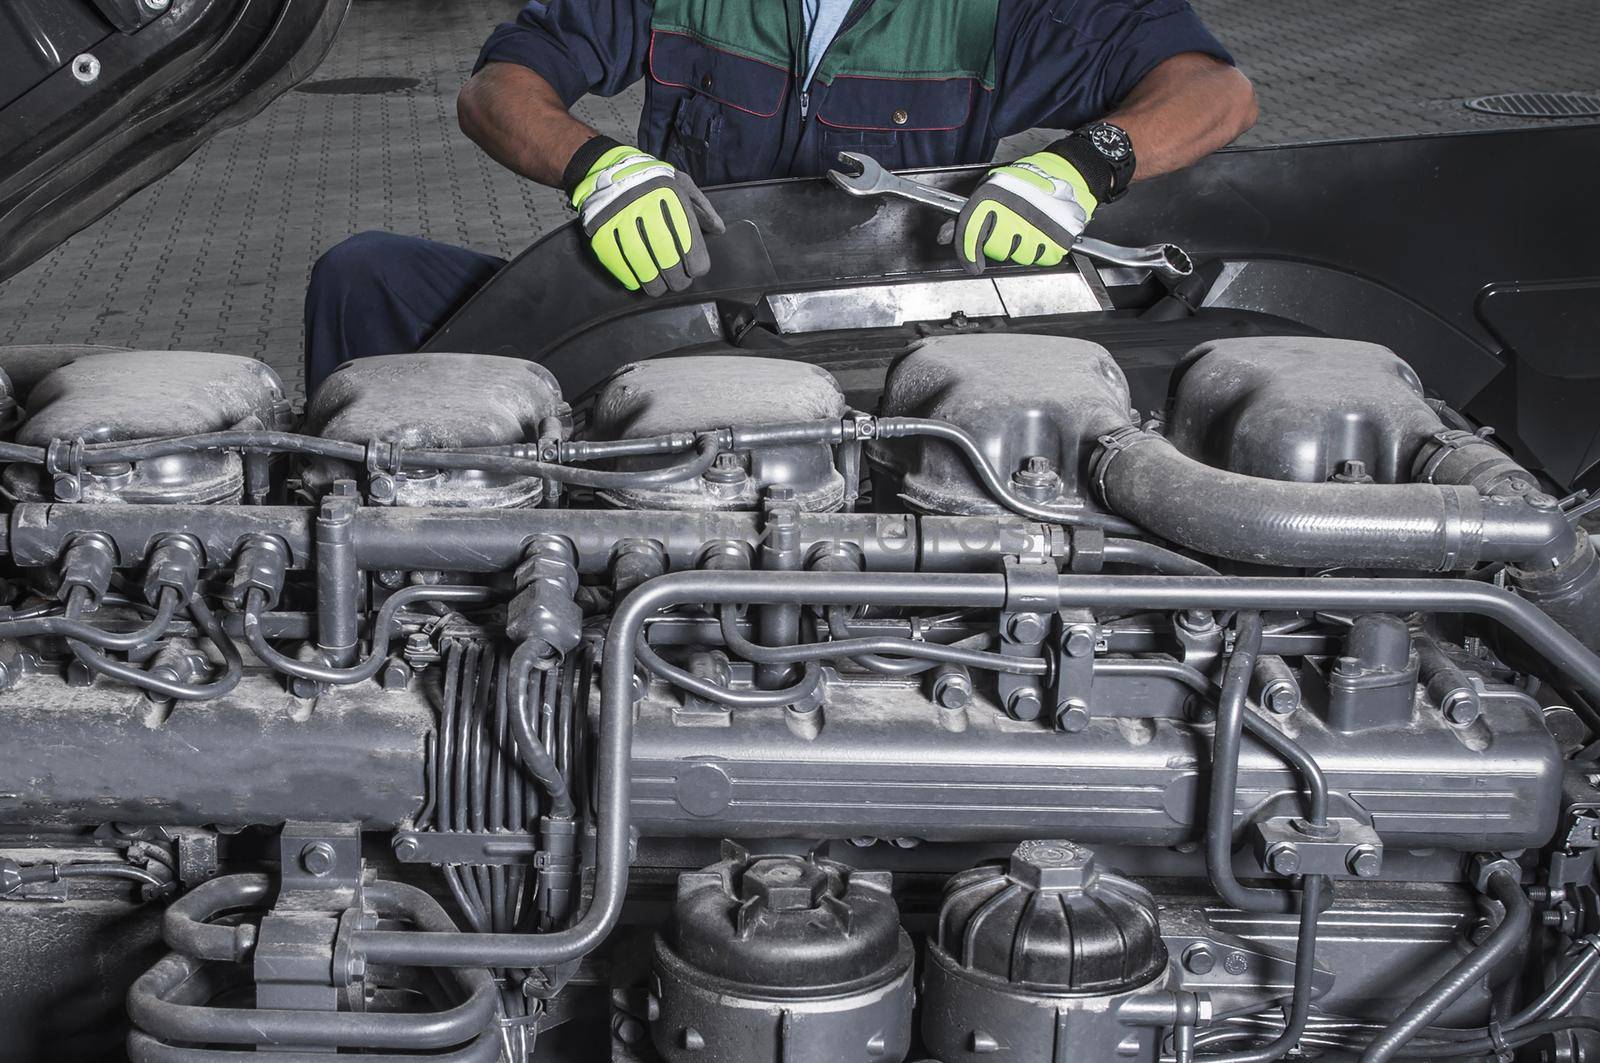 Heavy Duty Truck Diesel Engines Technician Maintain Scheduled Service Staying in Front of Modern Semi Truck Engine.